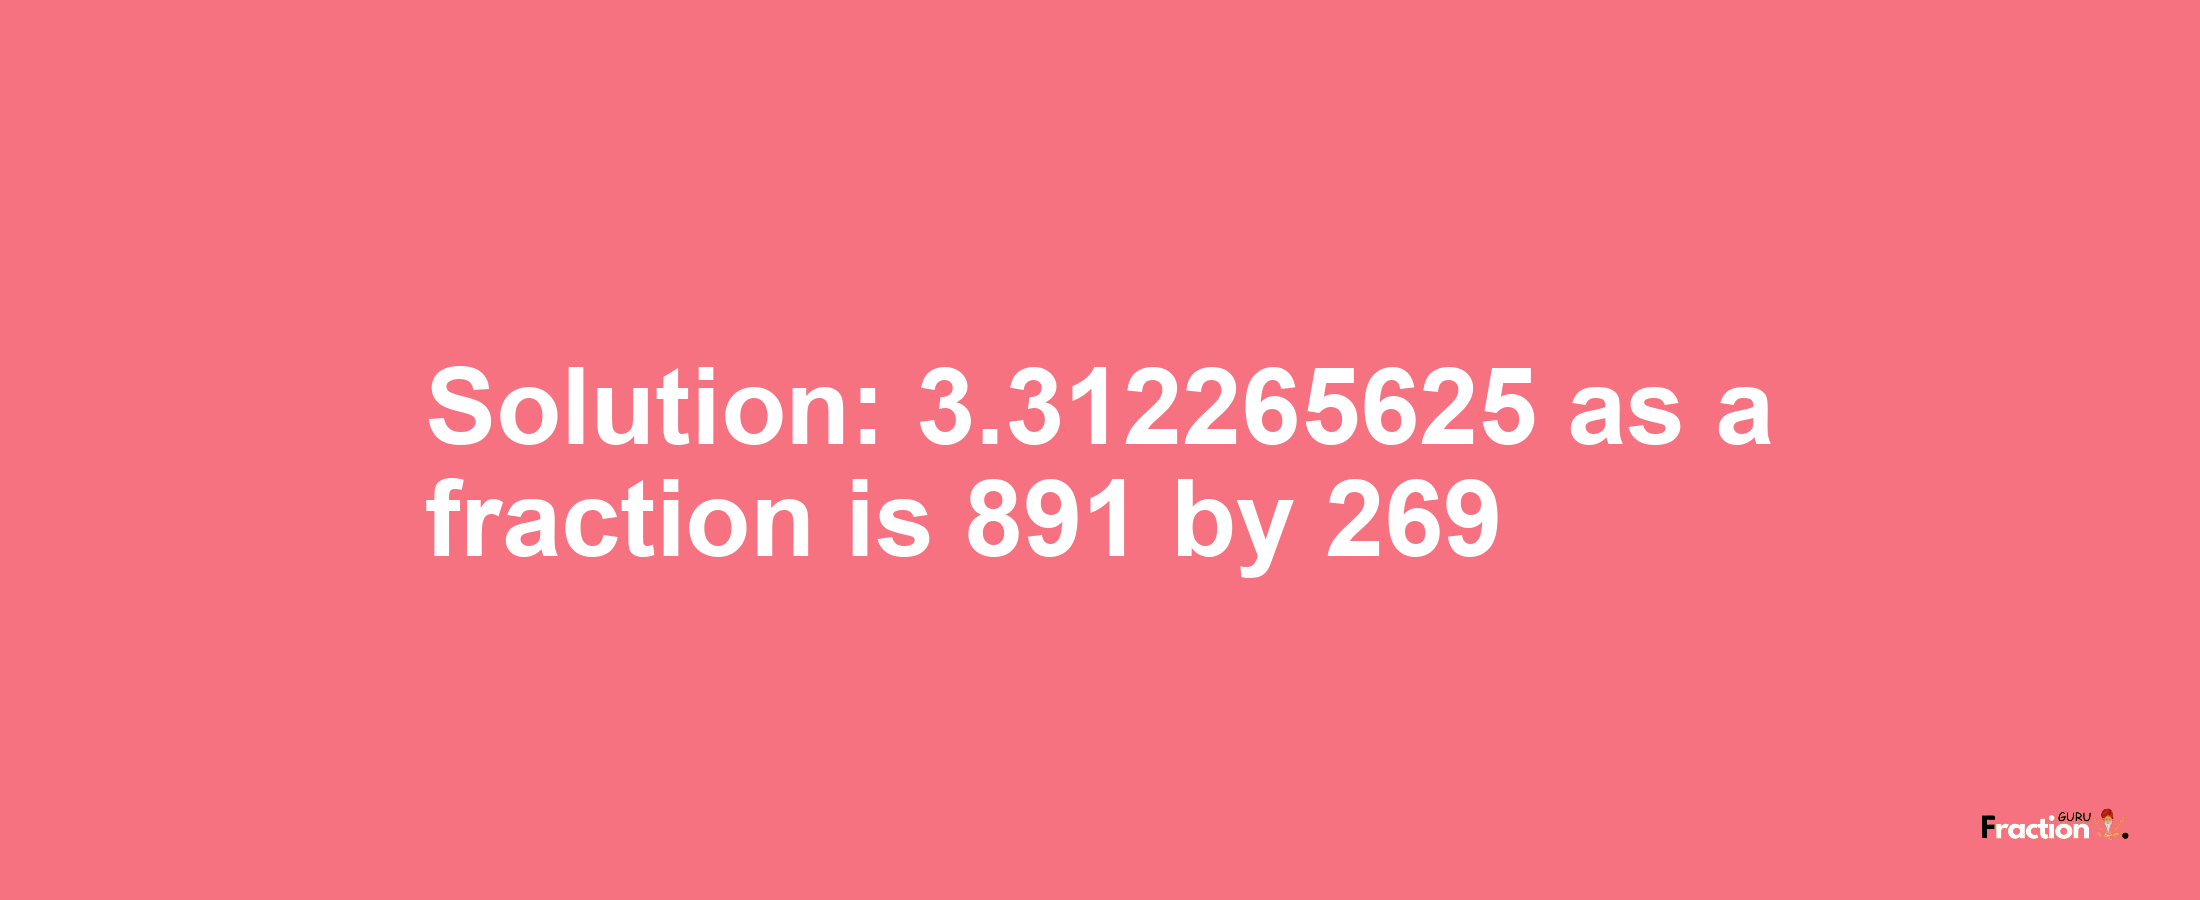 Solution:3.312265625 as a fraction is 891/269